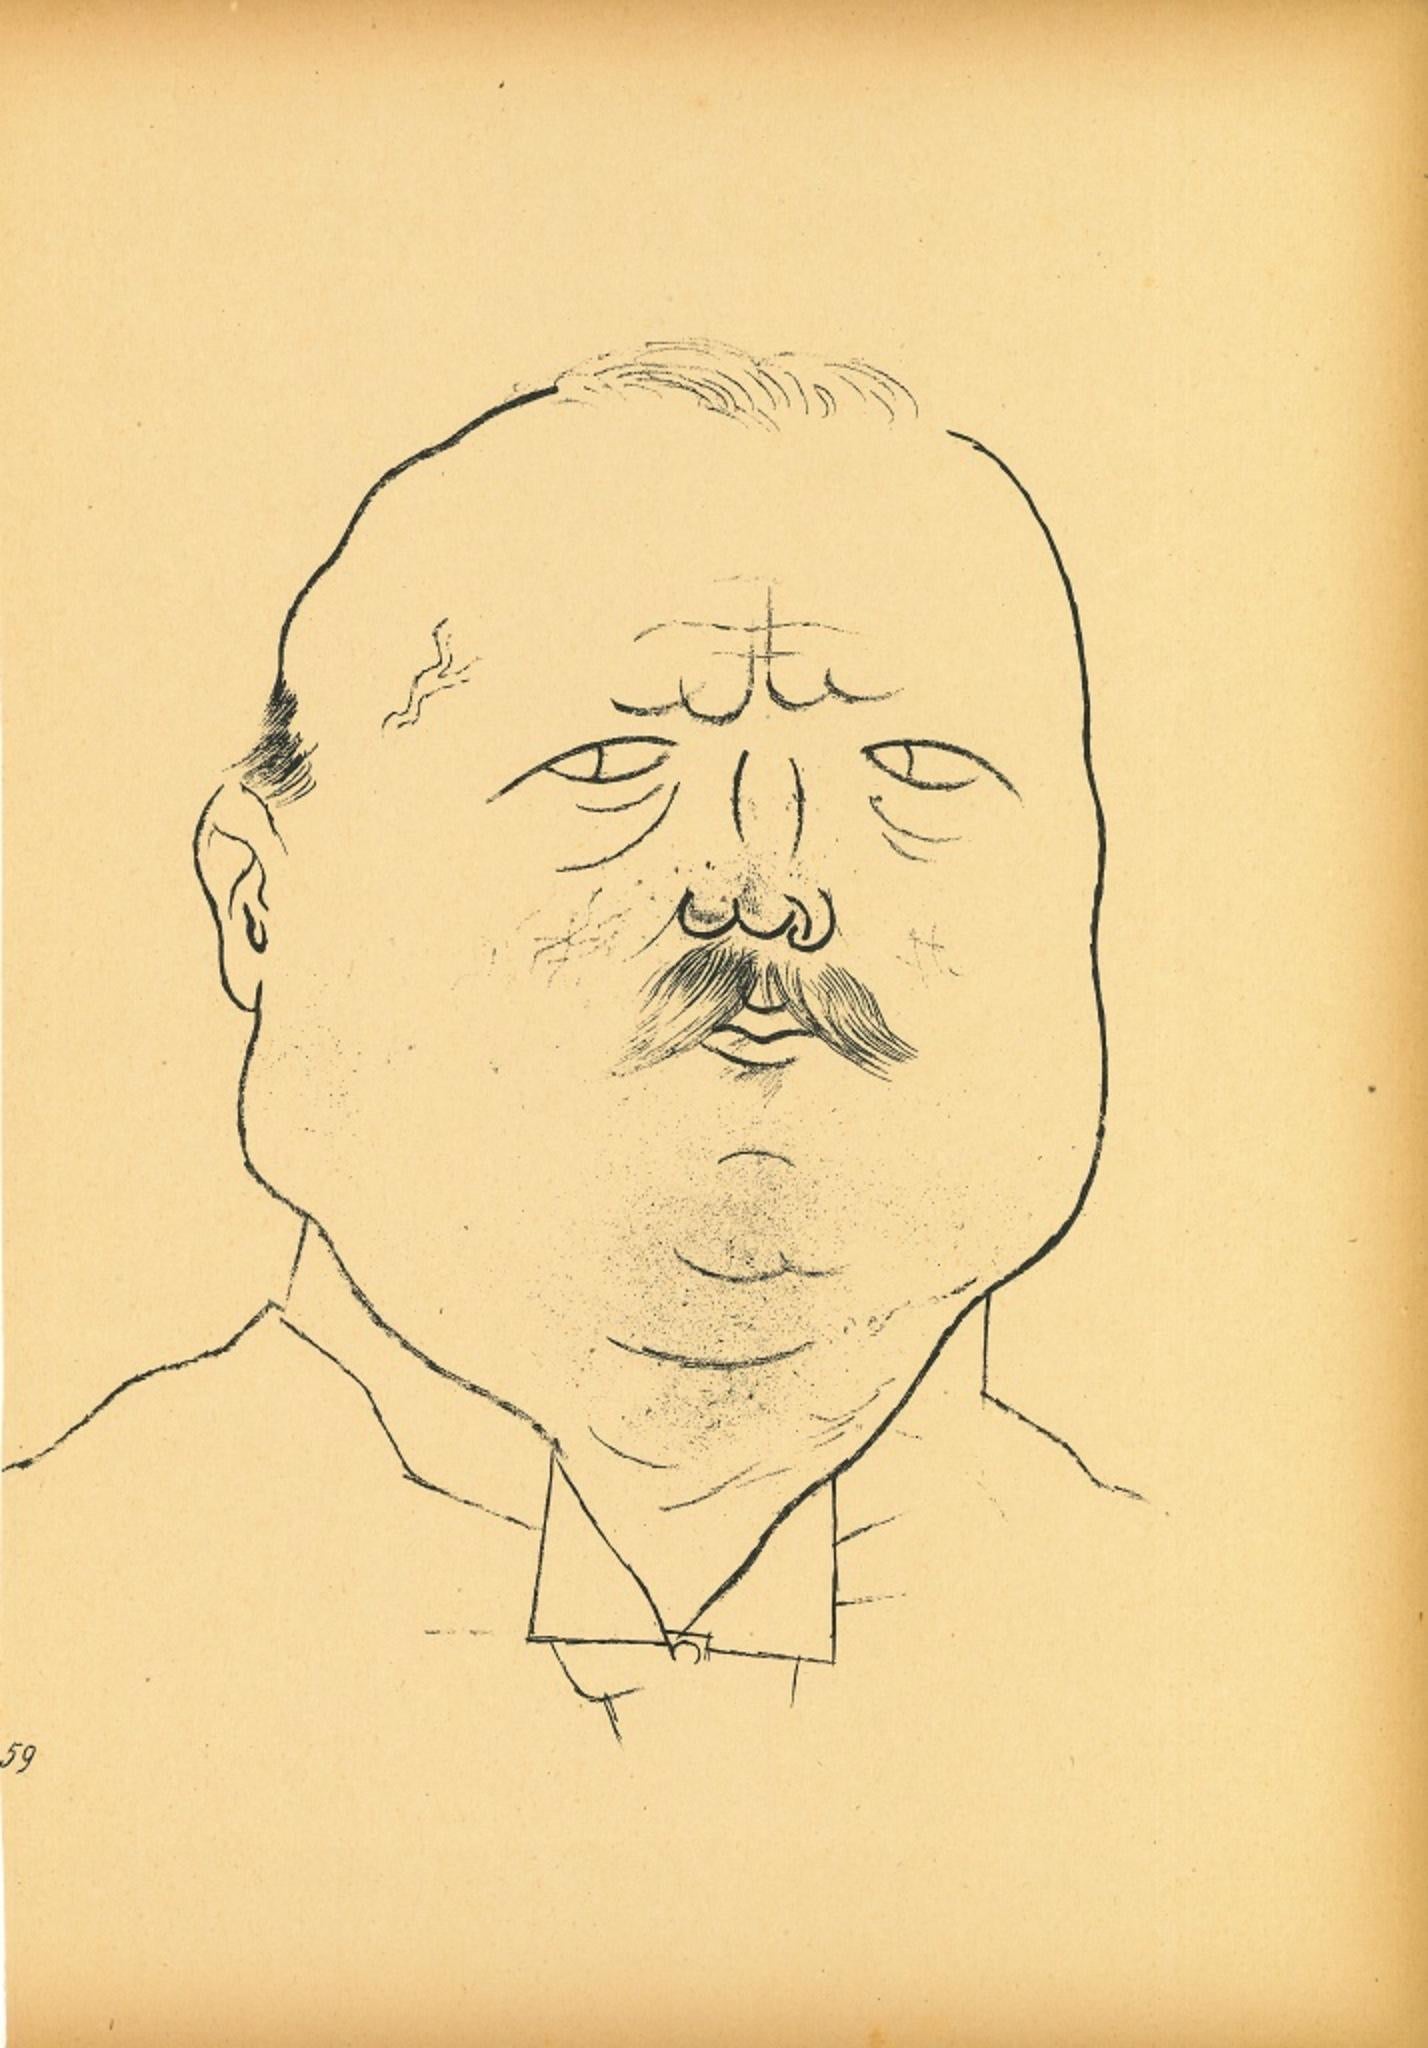 Man of Honor - Offset and Lithograph by George Grosz - 1923